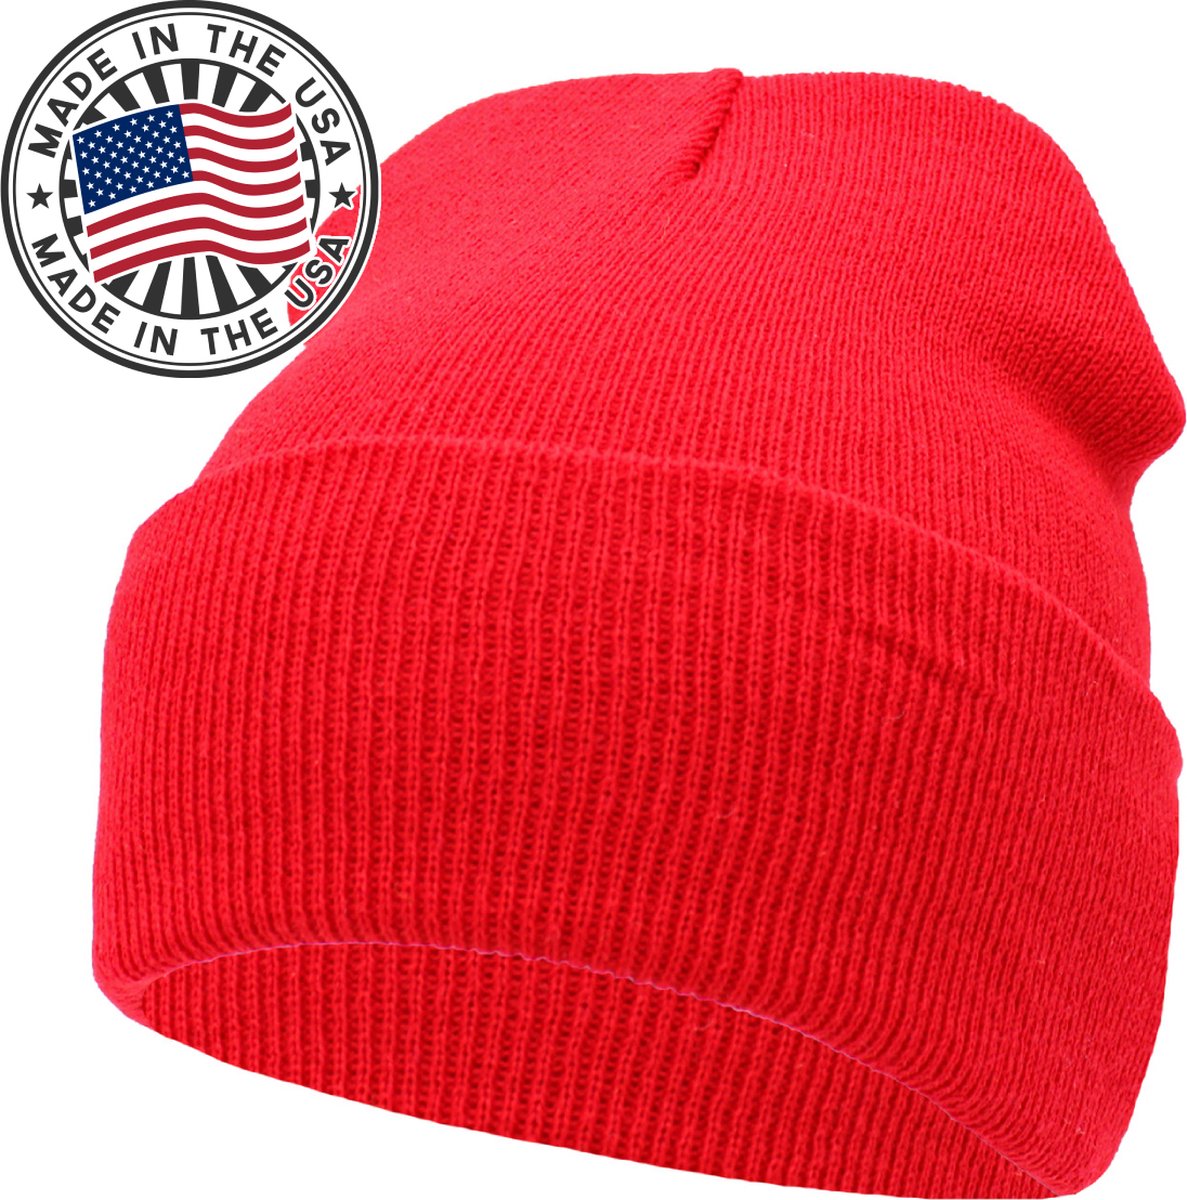 KB-ETHOS® Winter Muts SKL-RED Solid Long Beanie XL-Lang Acryl Rood